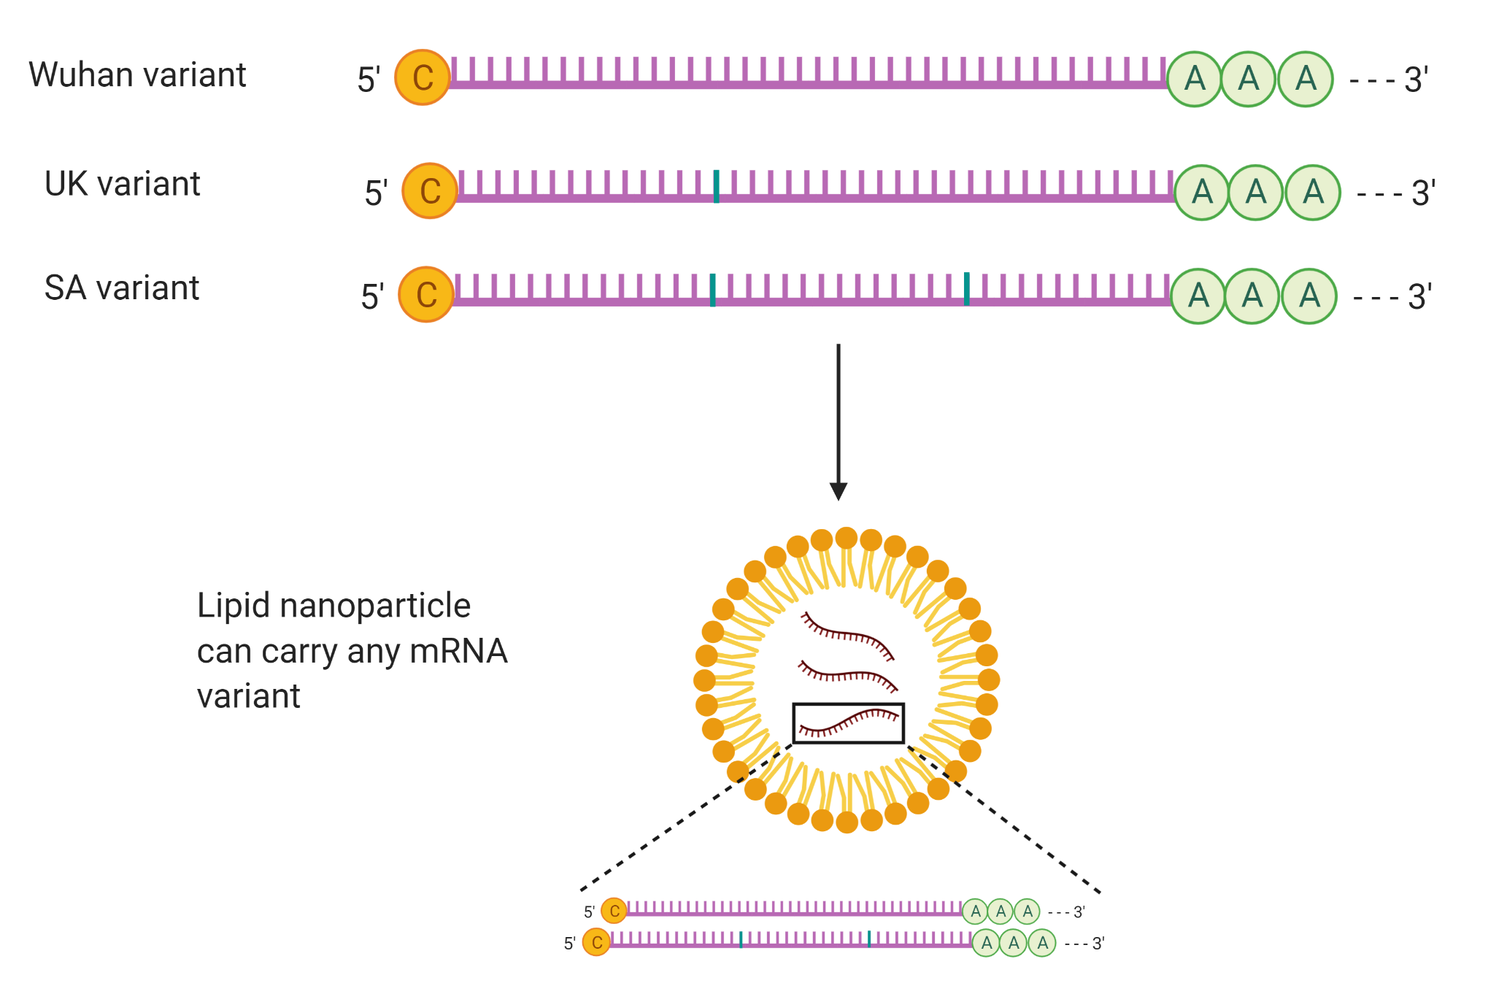 mRNA vaccines designed for different variants have similar manufacturing and packaging processes